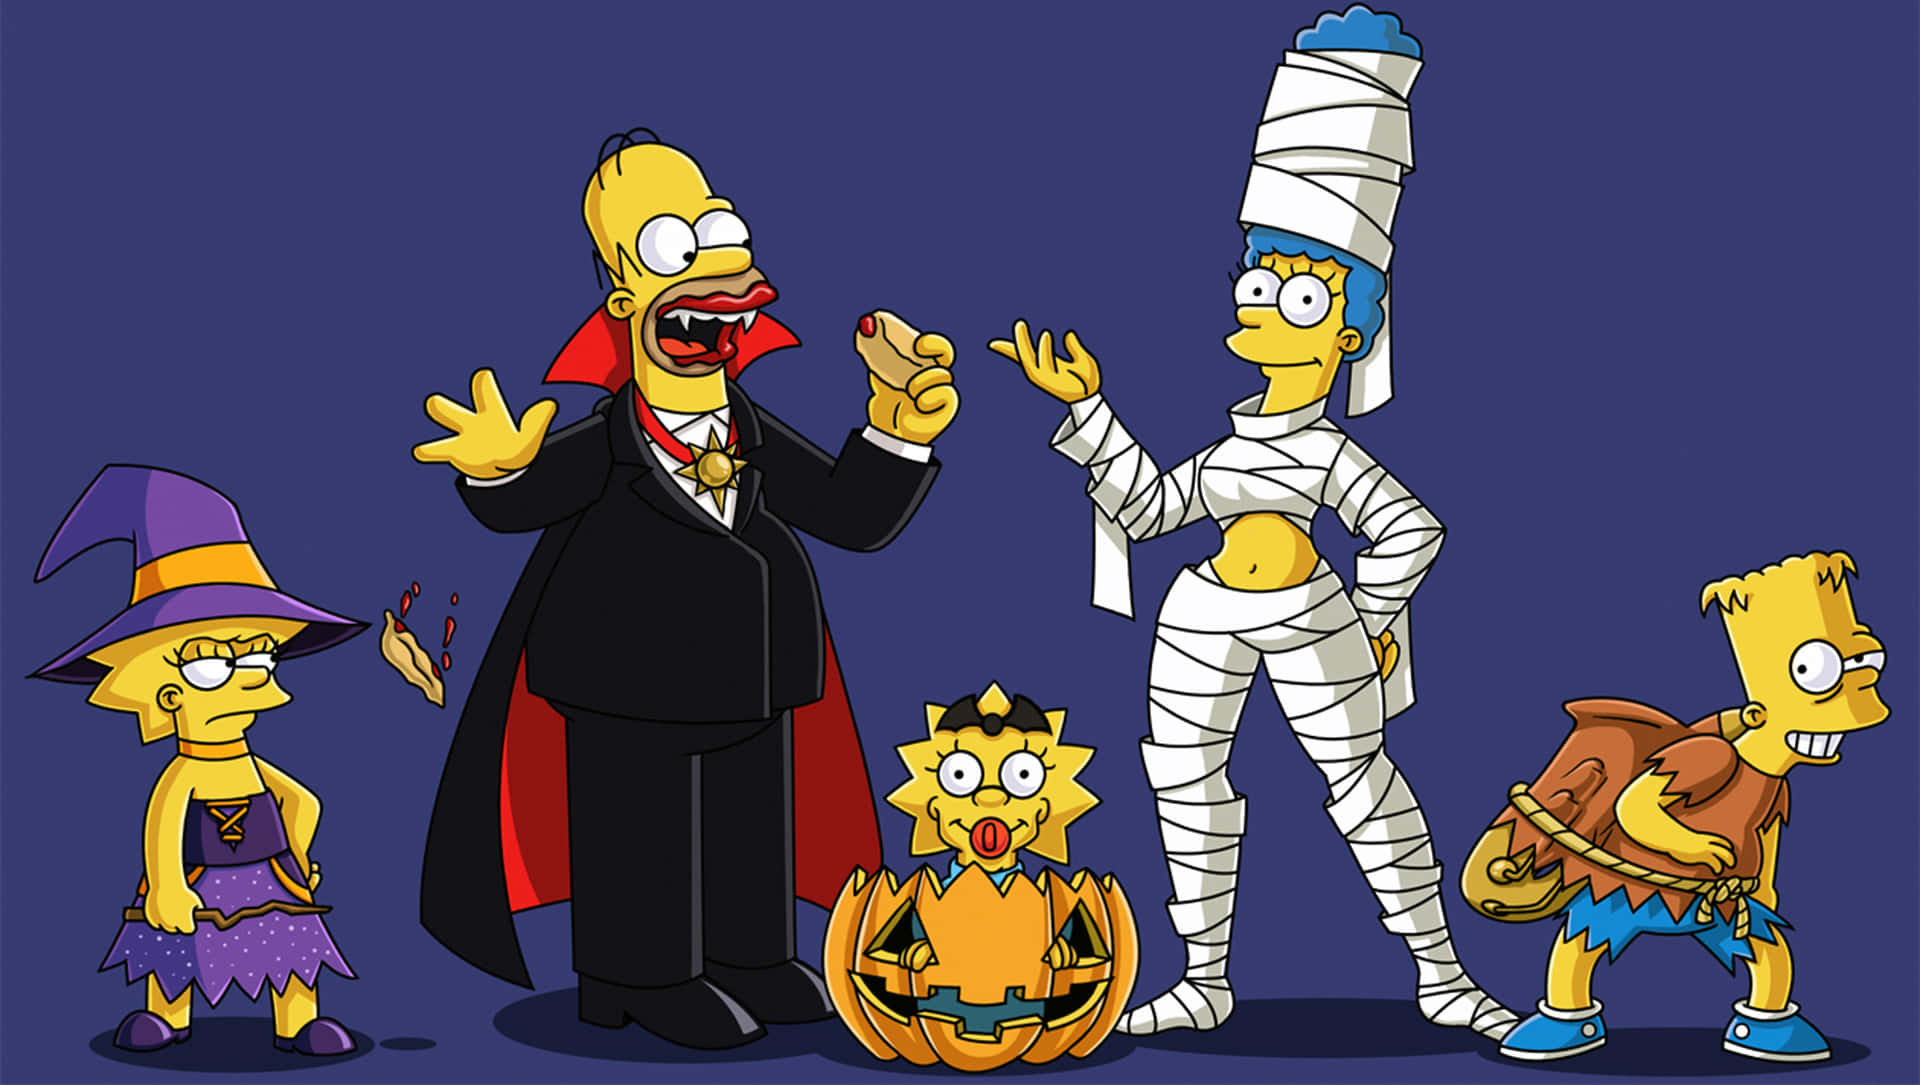 Free Funny Simpsons Wallpaper Downloads, [100+] Funny Simpsons Wallpapers  for FREE 